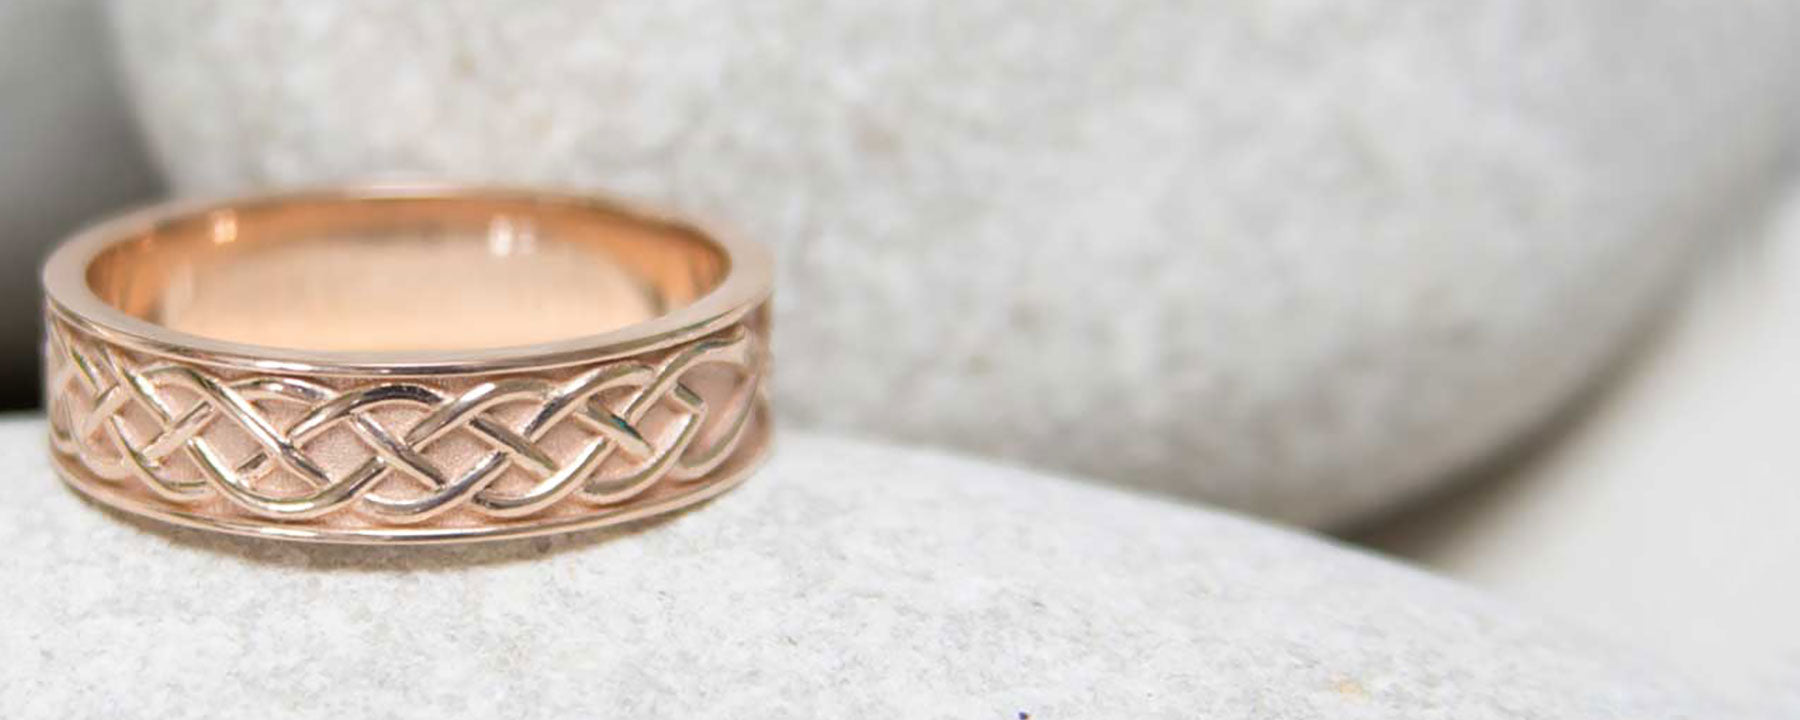 A custom rose gold mens wedding ring. A 5mm rose gold band is hand-engraved with Celtic knots. Unique custom wedding bands